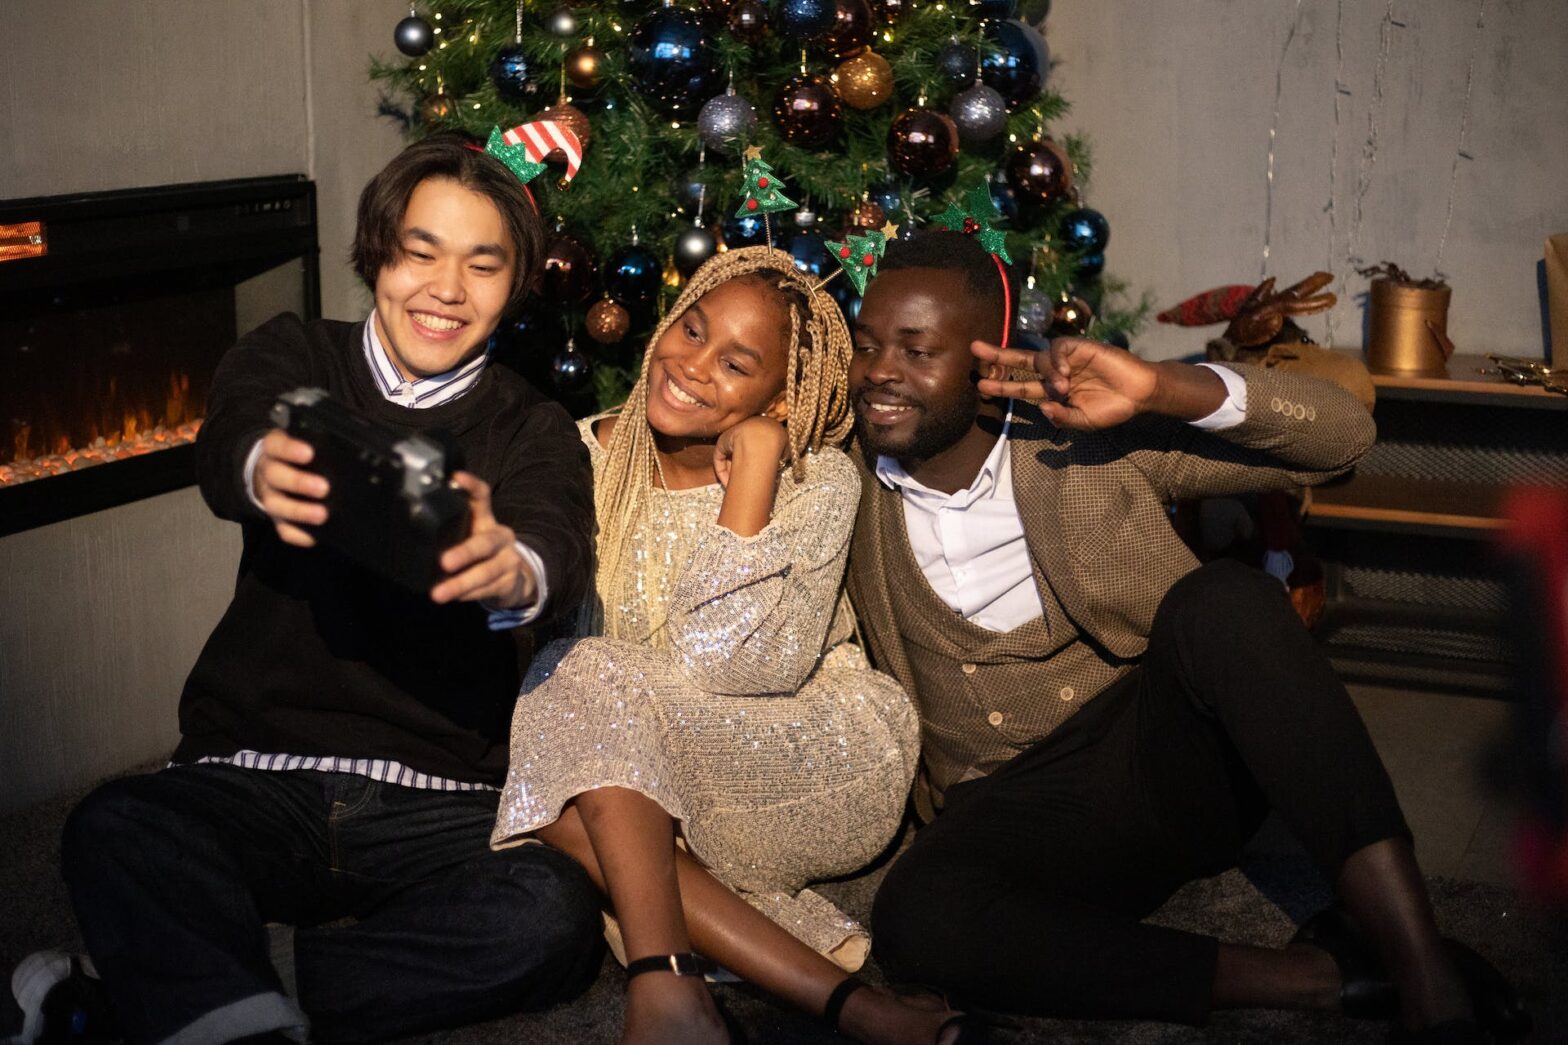 A group of friends taking a photo by a Christmas tree